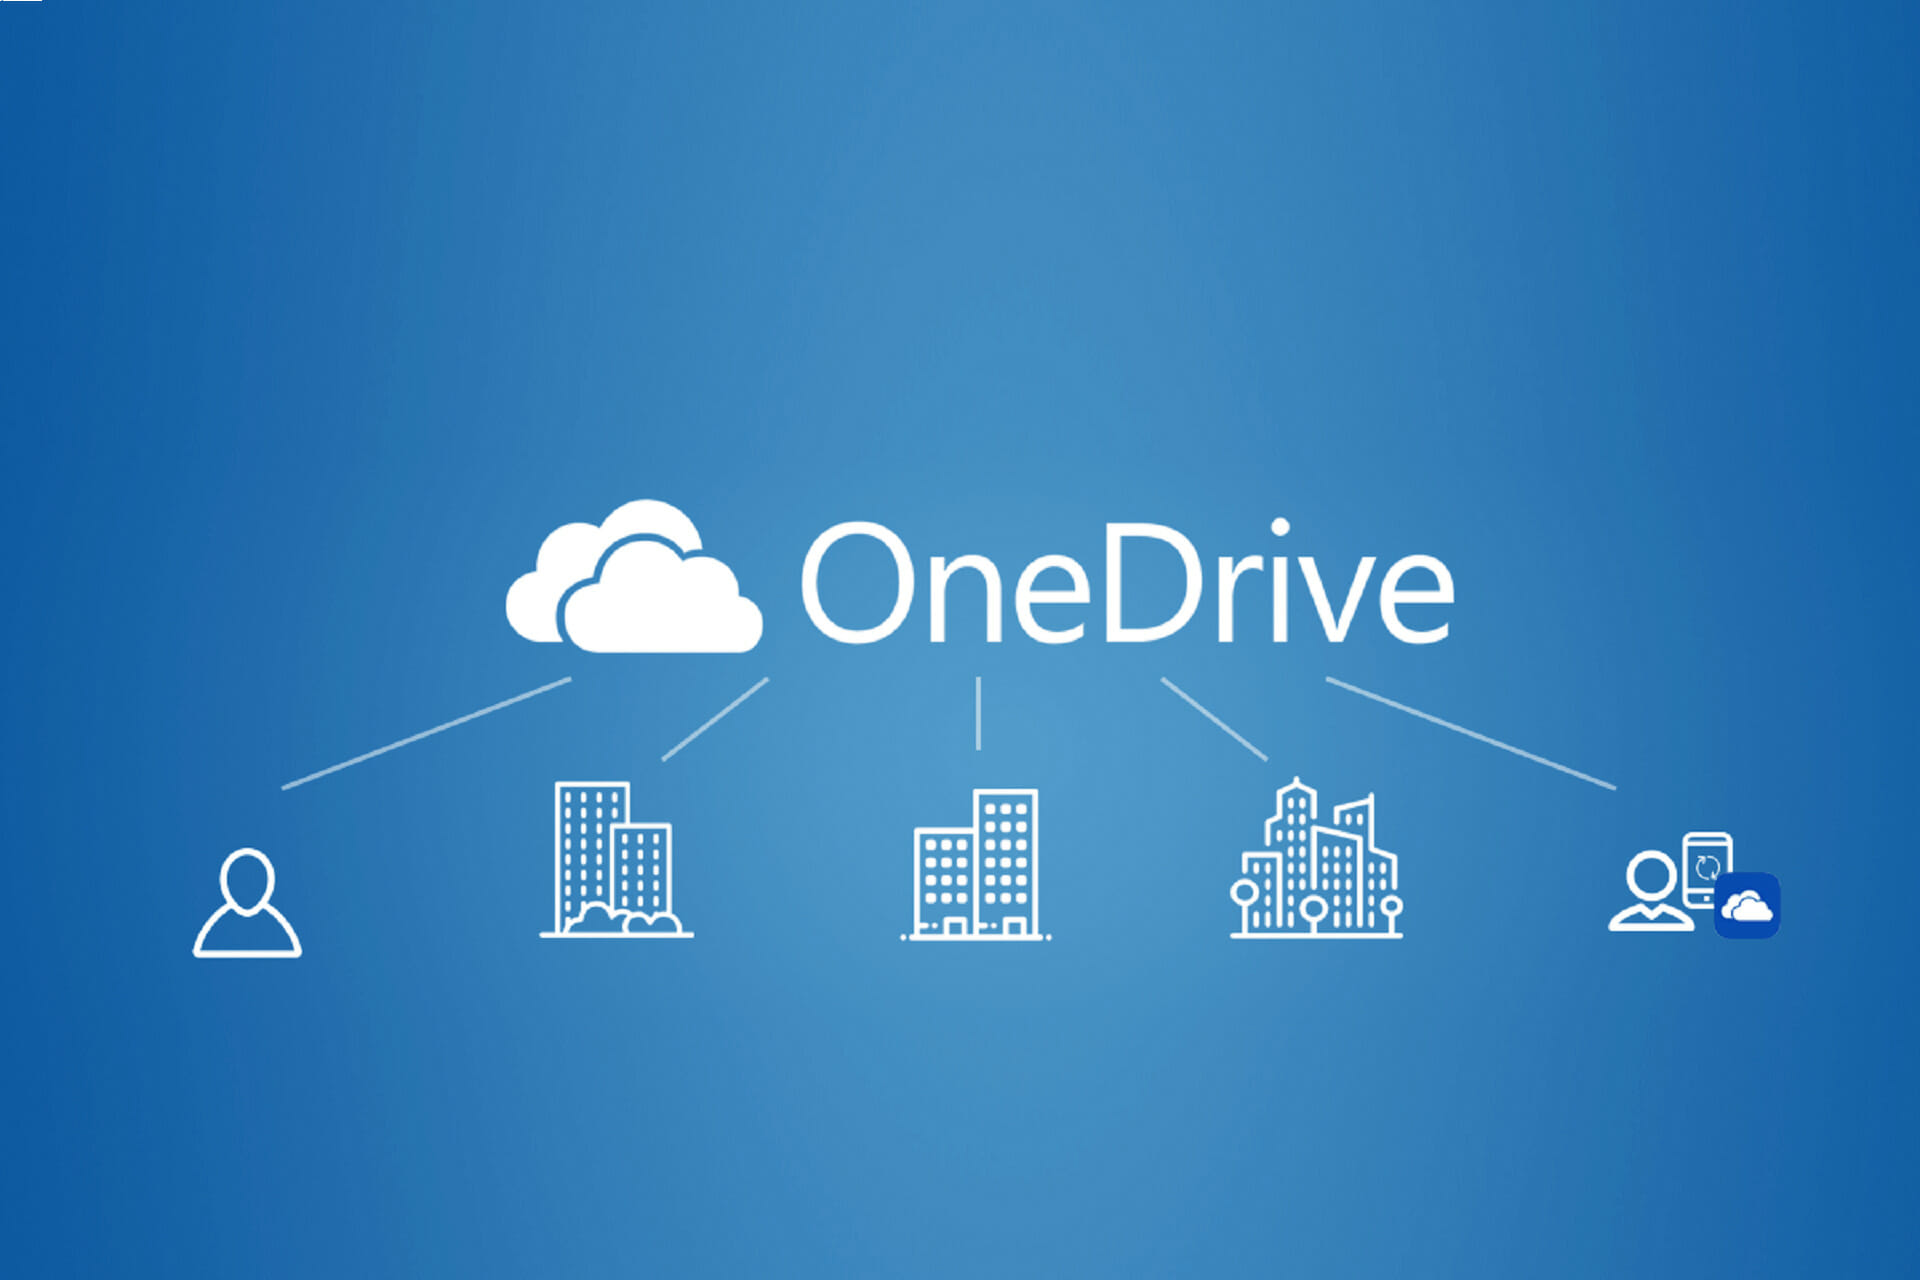 is the installation process for onedrive different from a mac to a pc